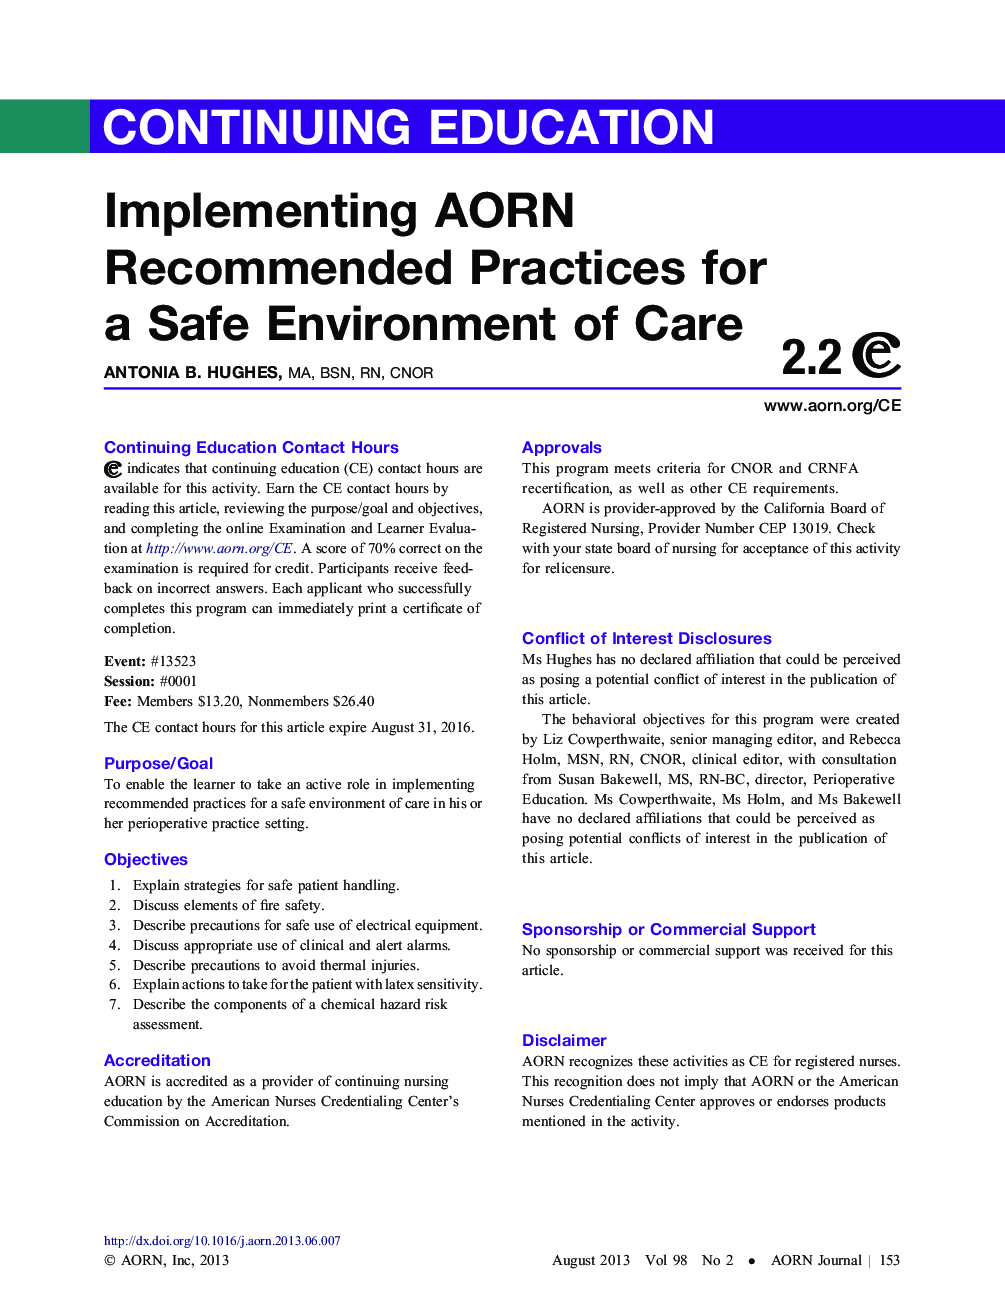 Implementing AORN Recommended Practices for a Safe Environment of Care